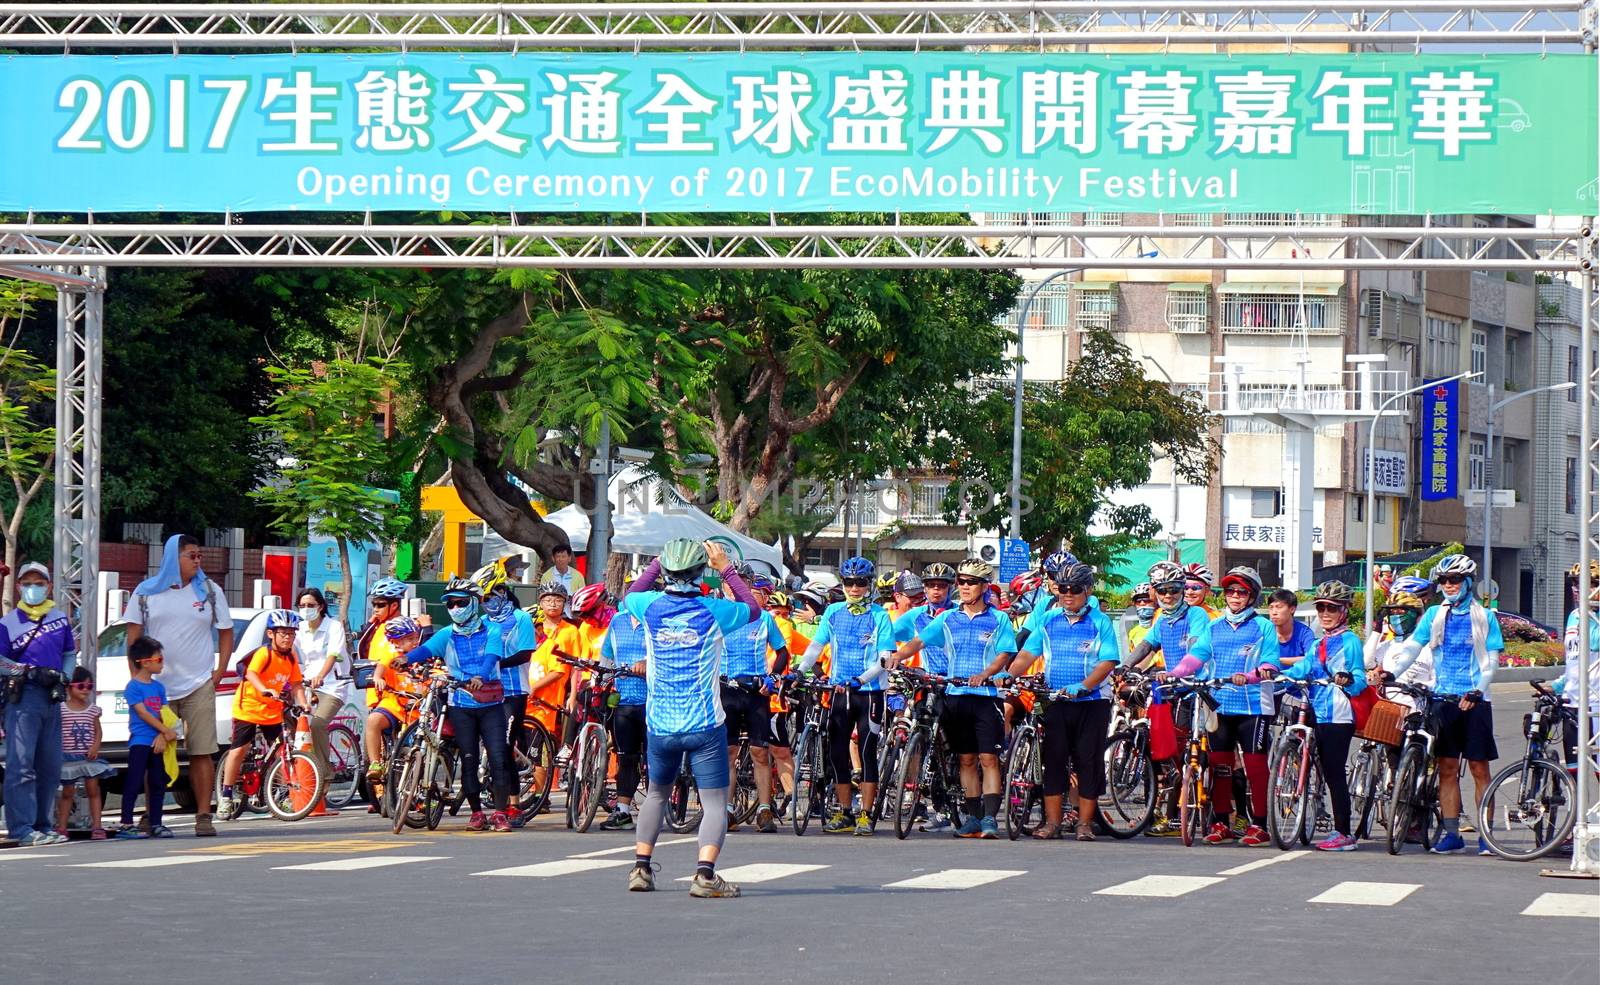 KAOHSIUNG, TAIWAN -- OCTOBER 1, 2017: A large team of cyclists prepares to take part in a street parade at the opening of the 2017 Ecomobility Festival.
